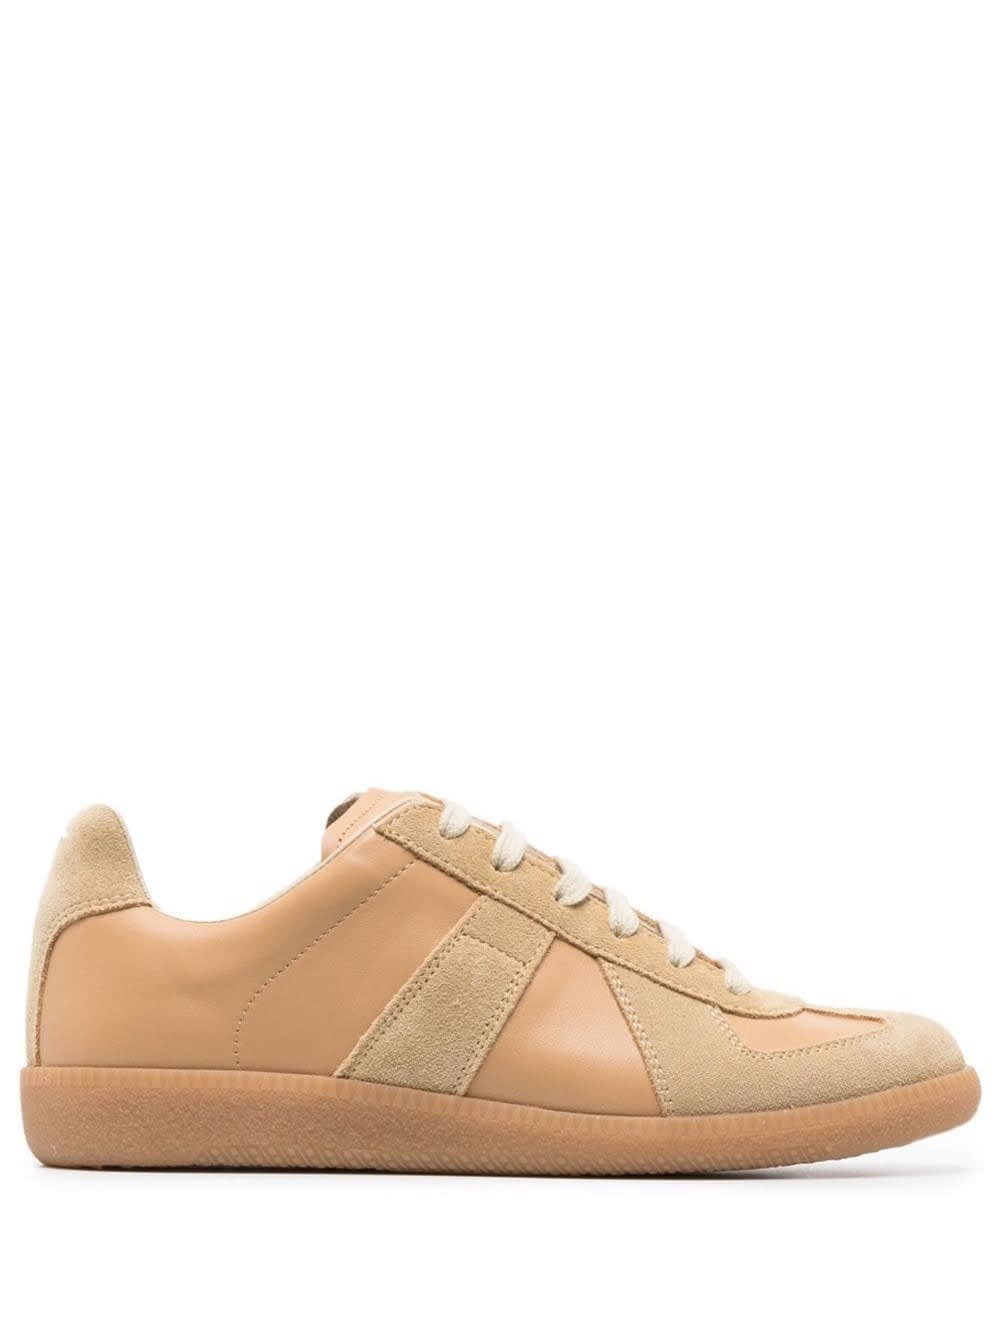 MAISON MARGIELA REPLICA BEIGE LOW-TOP SNEAKERS WITH SUEDE INSERTS IN LEATHER WOMAN MAISON MARGIELA